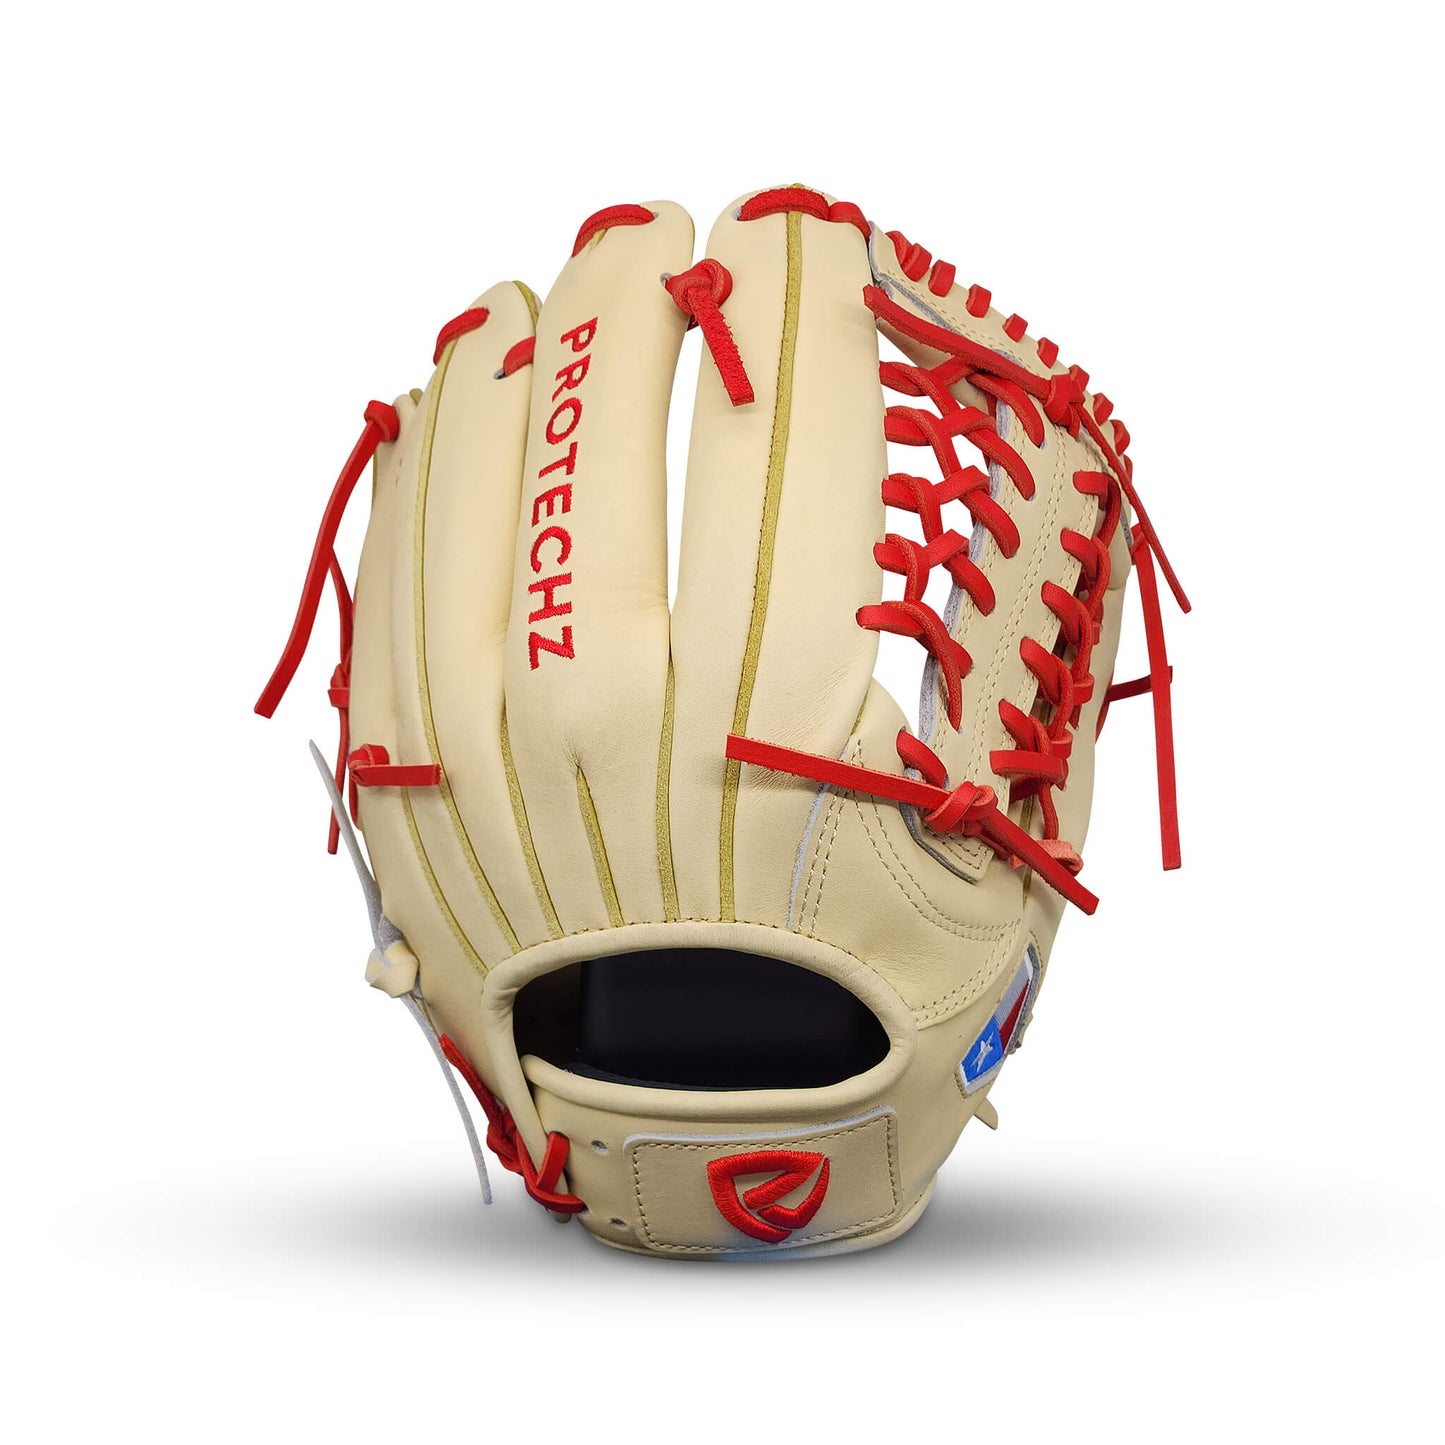 Titan Series Limited Edition 11.75” Infield Glove with T-Web, Camel Shell and Palm, Red Lacing, and Embroidered Texas Flag – RHT